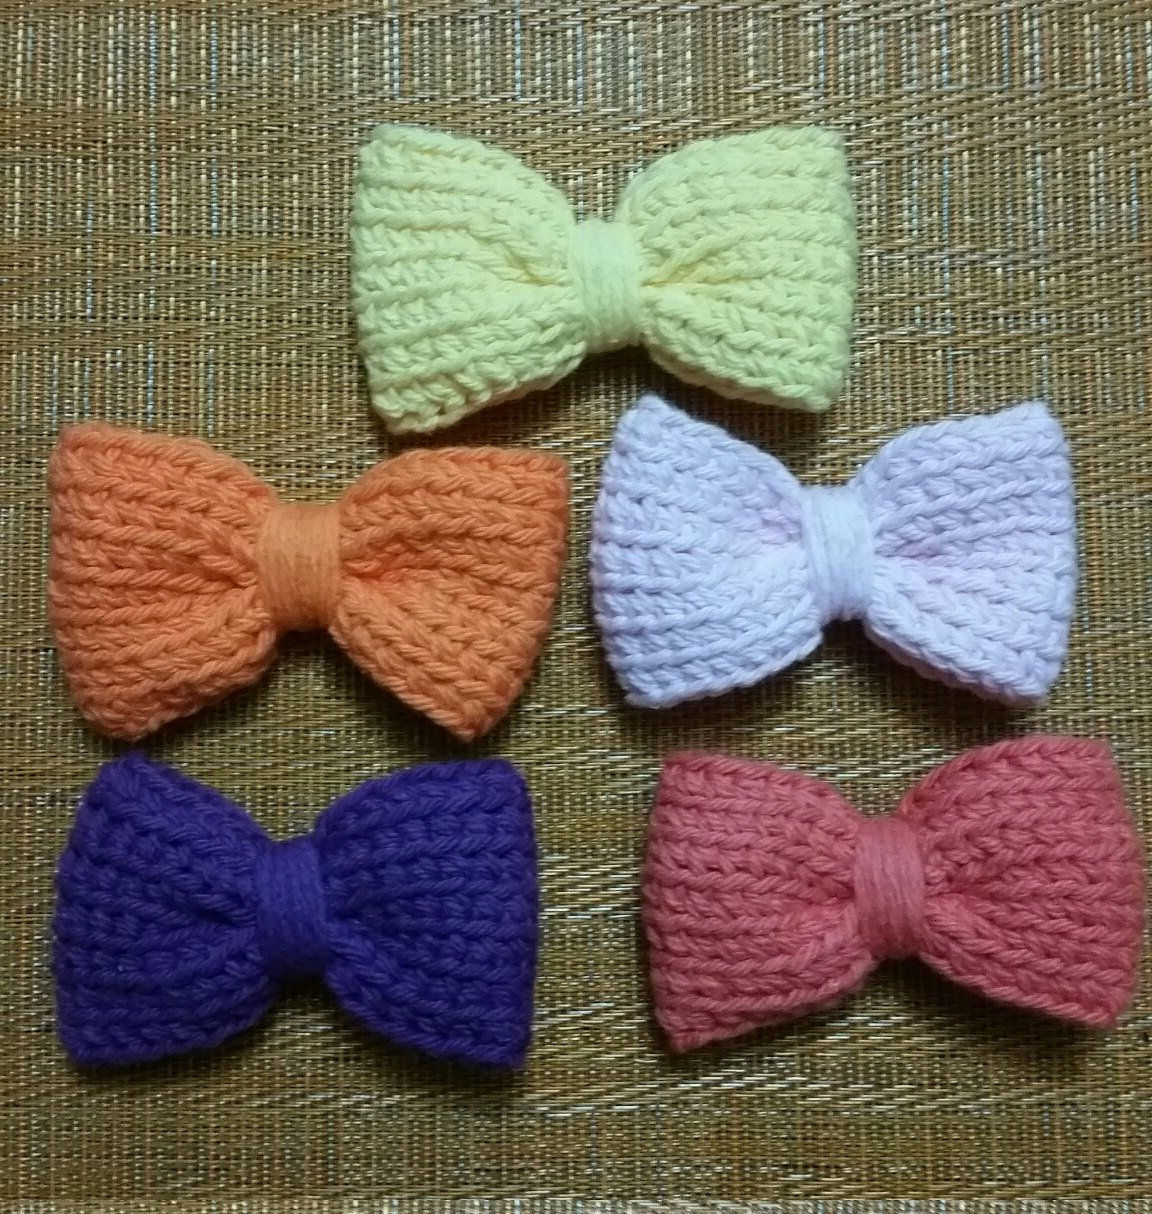 Crochet Hair Clip Patterns Free Crochet Hair Bows Hair Clips Crochet Pins And Barrettes For Etsy